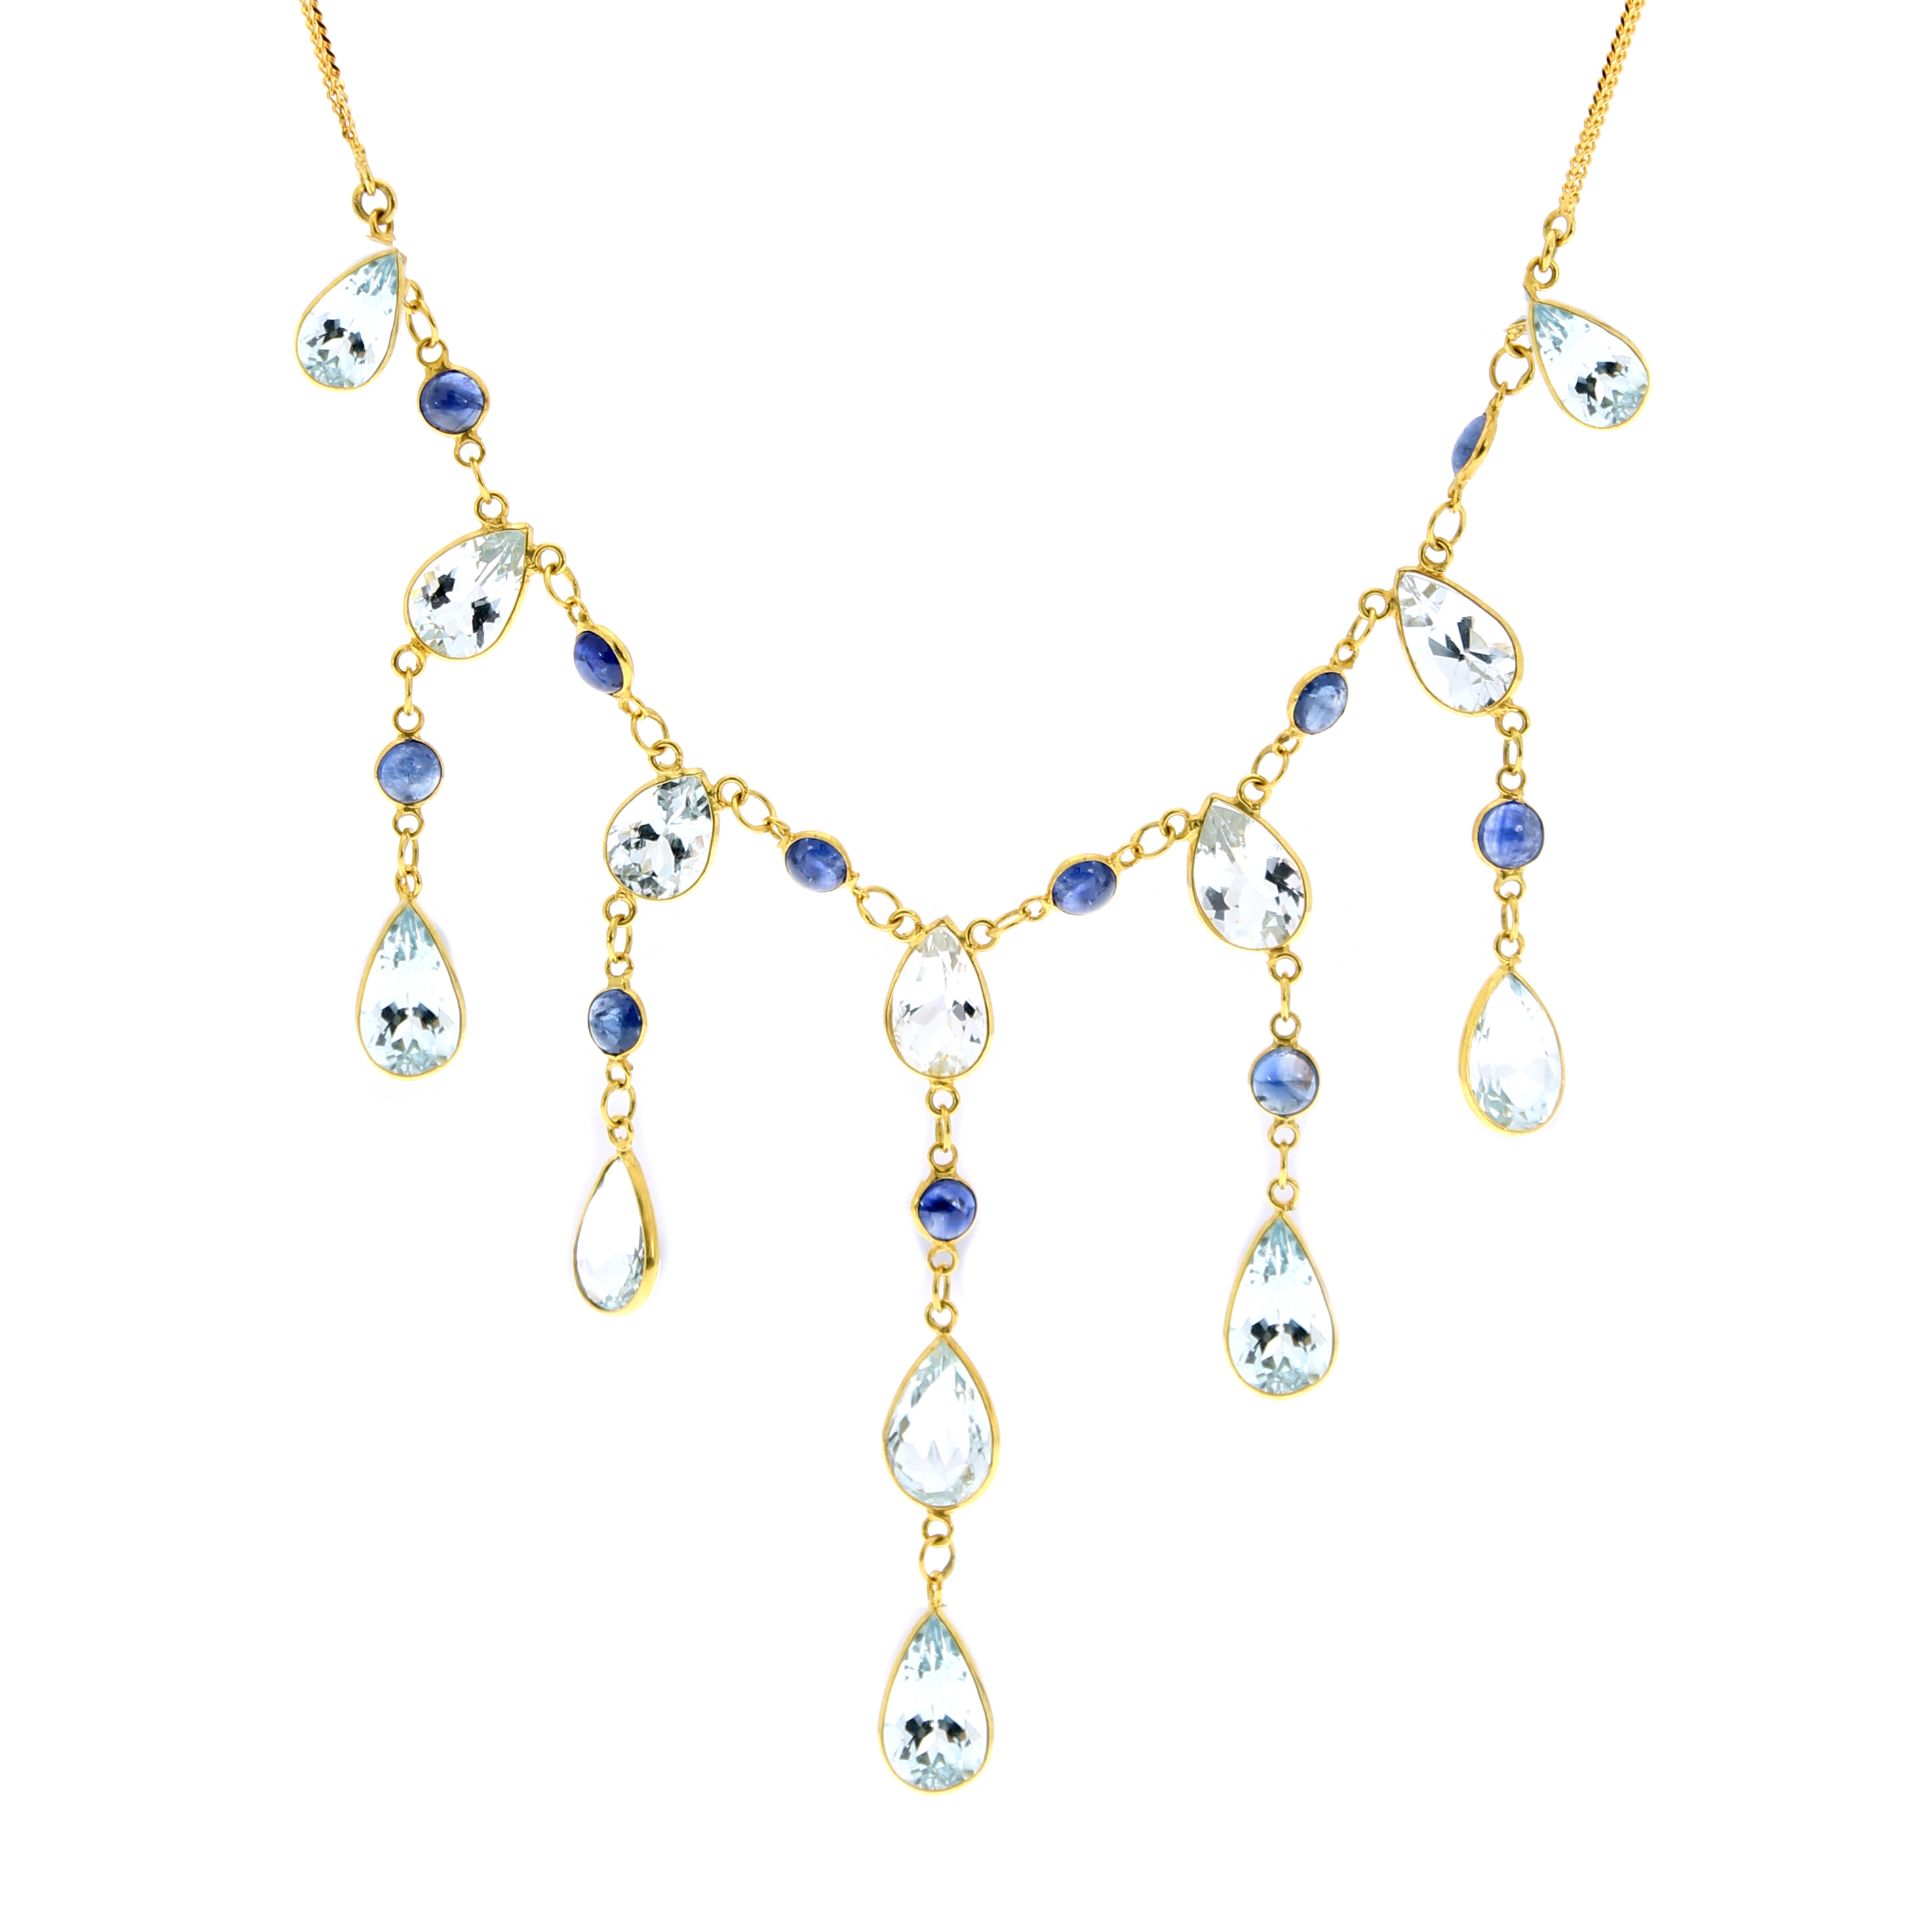 AN AQUAMARINE AND SAPPHIRE DROP NECKLACE in 14ct yellow gold, comprising seven graduated drops